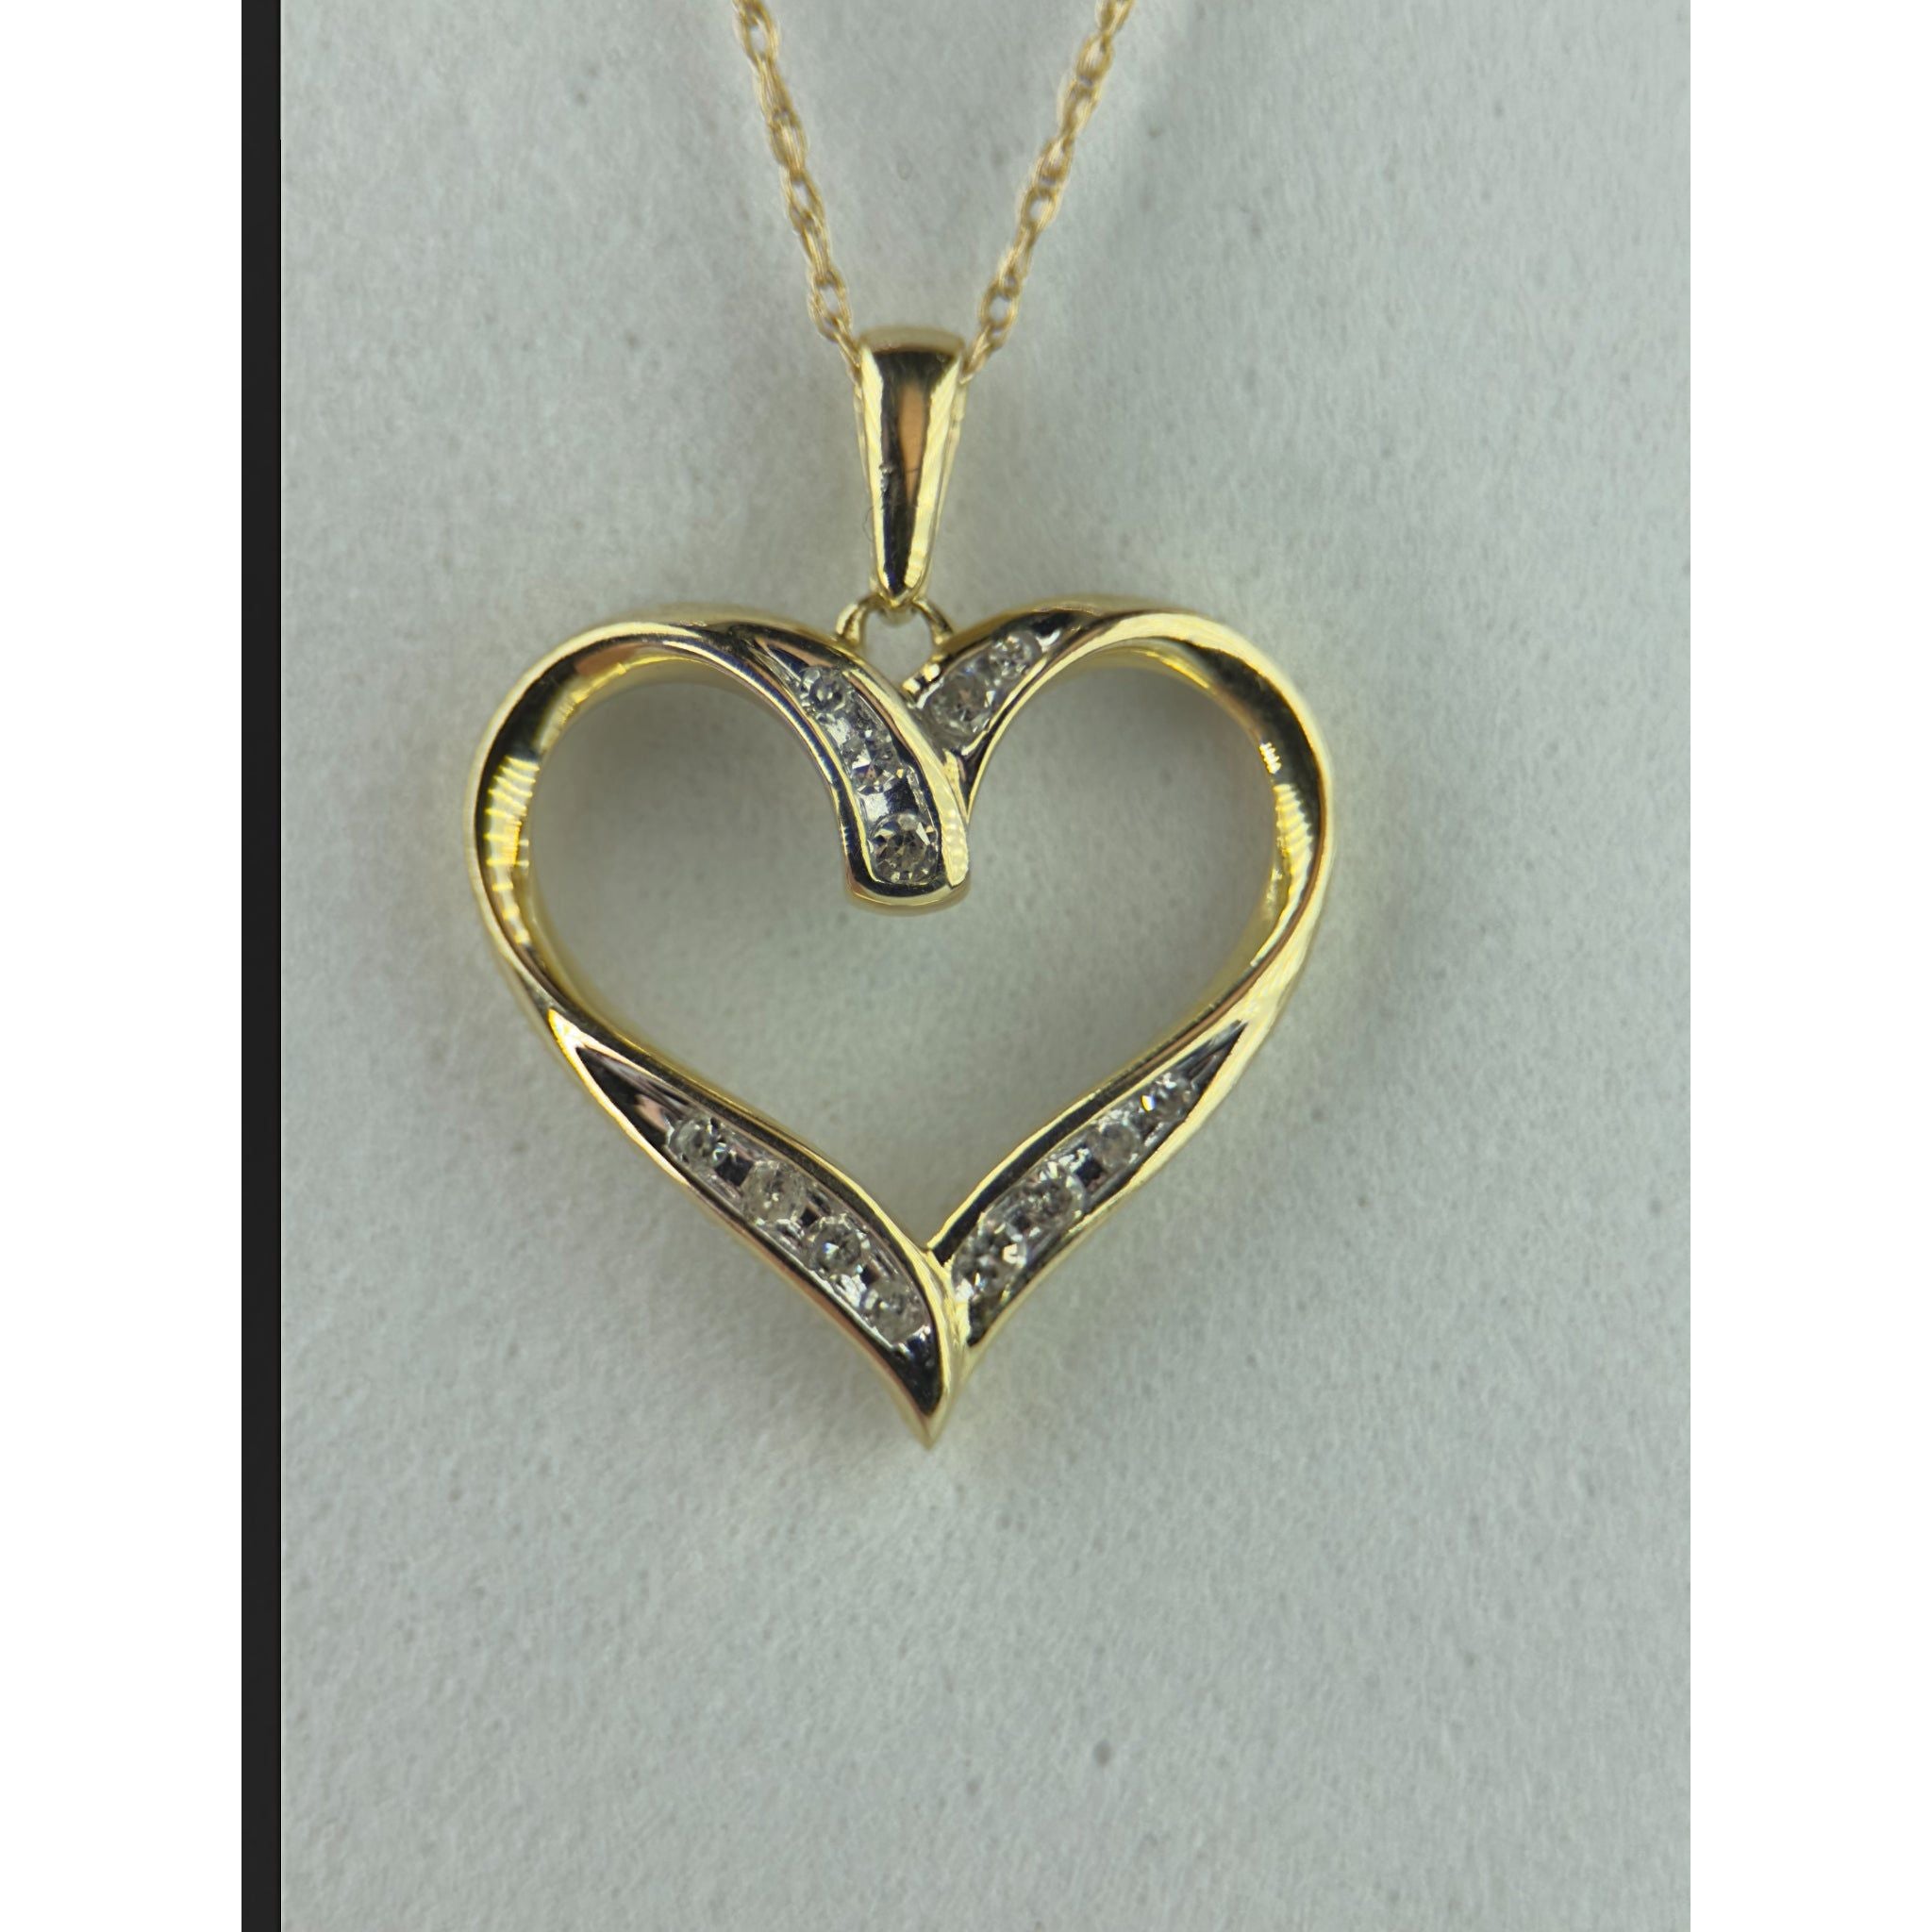 DR2201 - 10K Yellow Gold - Diamond - Pendant and Chain